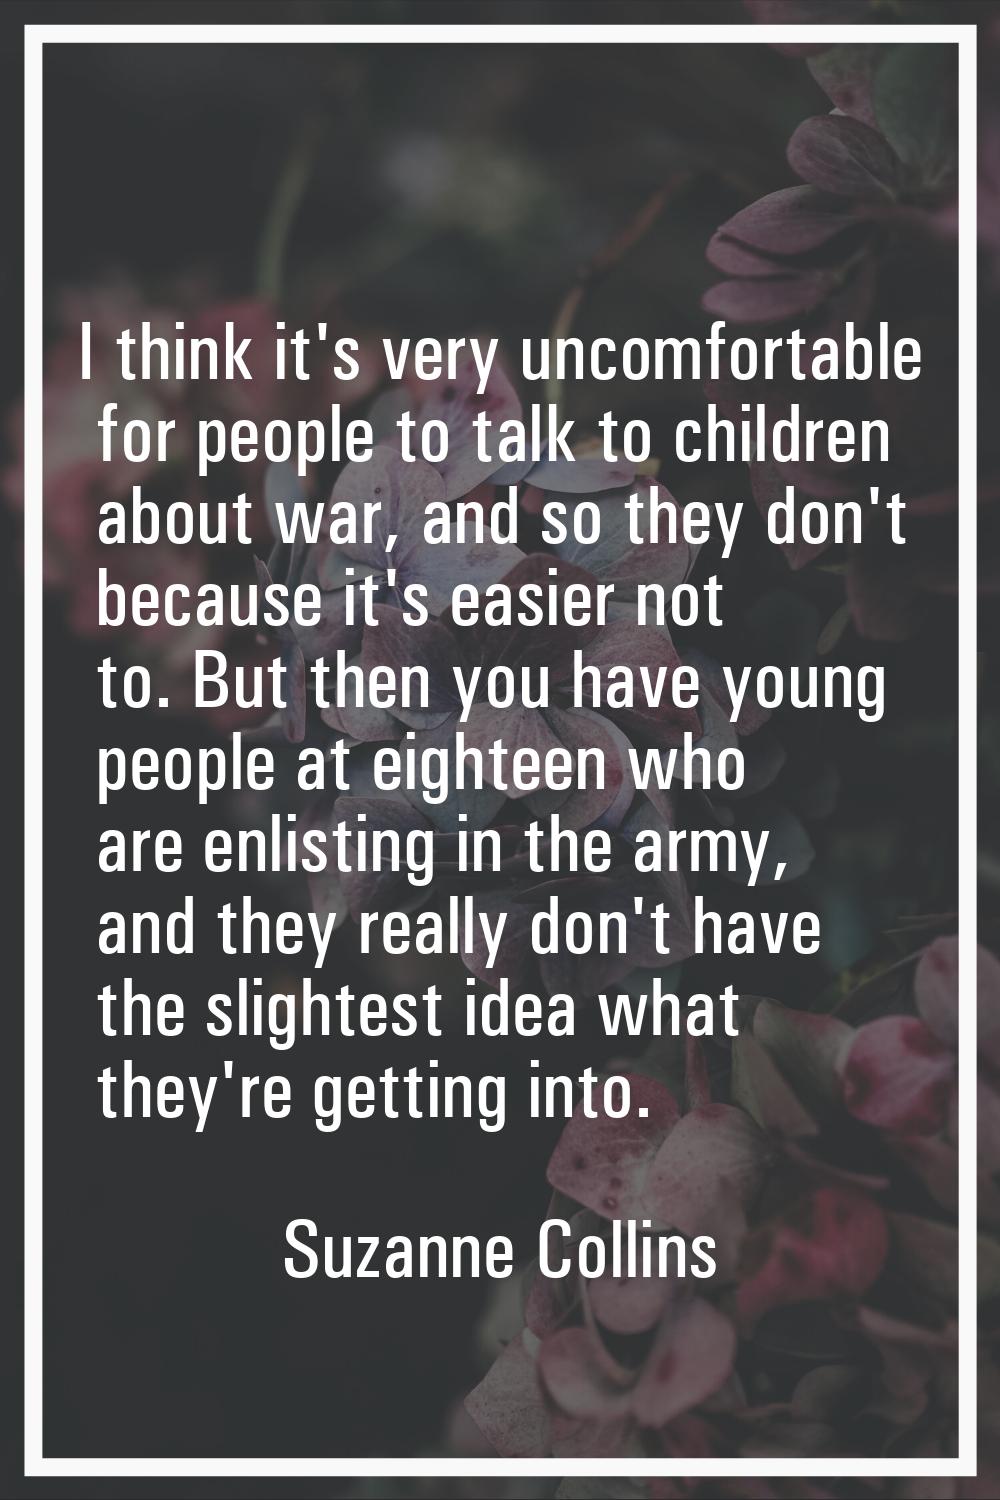 I think it's very uncomfortable for people to talk to children about war, and so they don't because